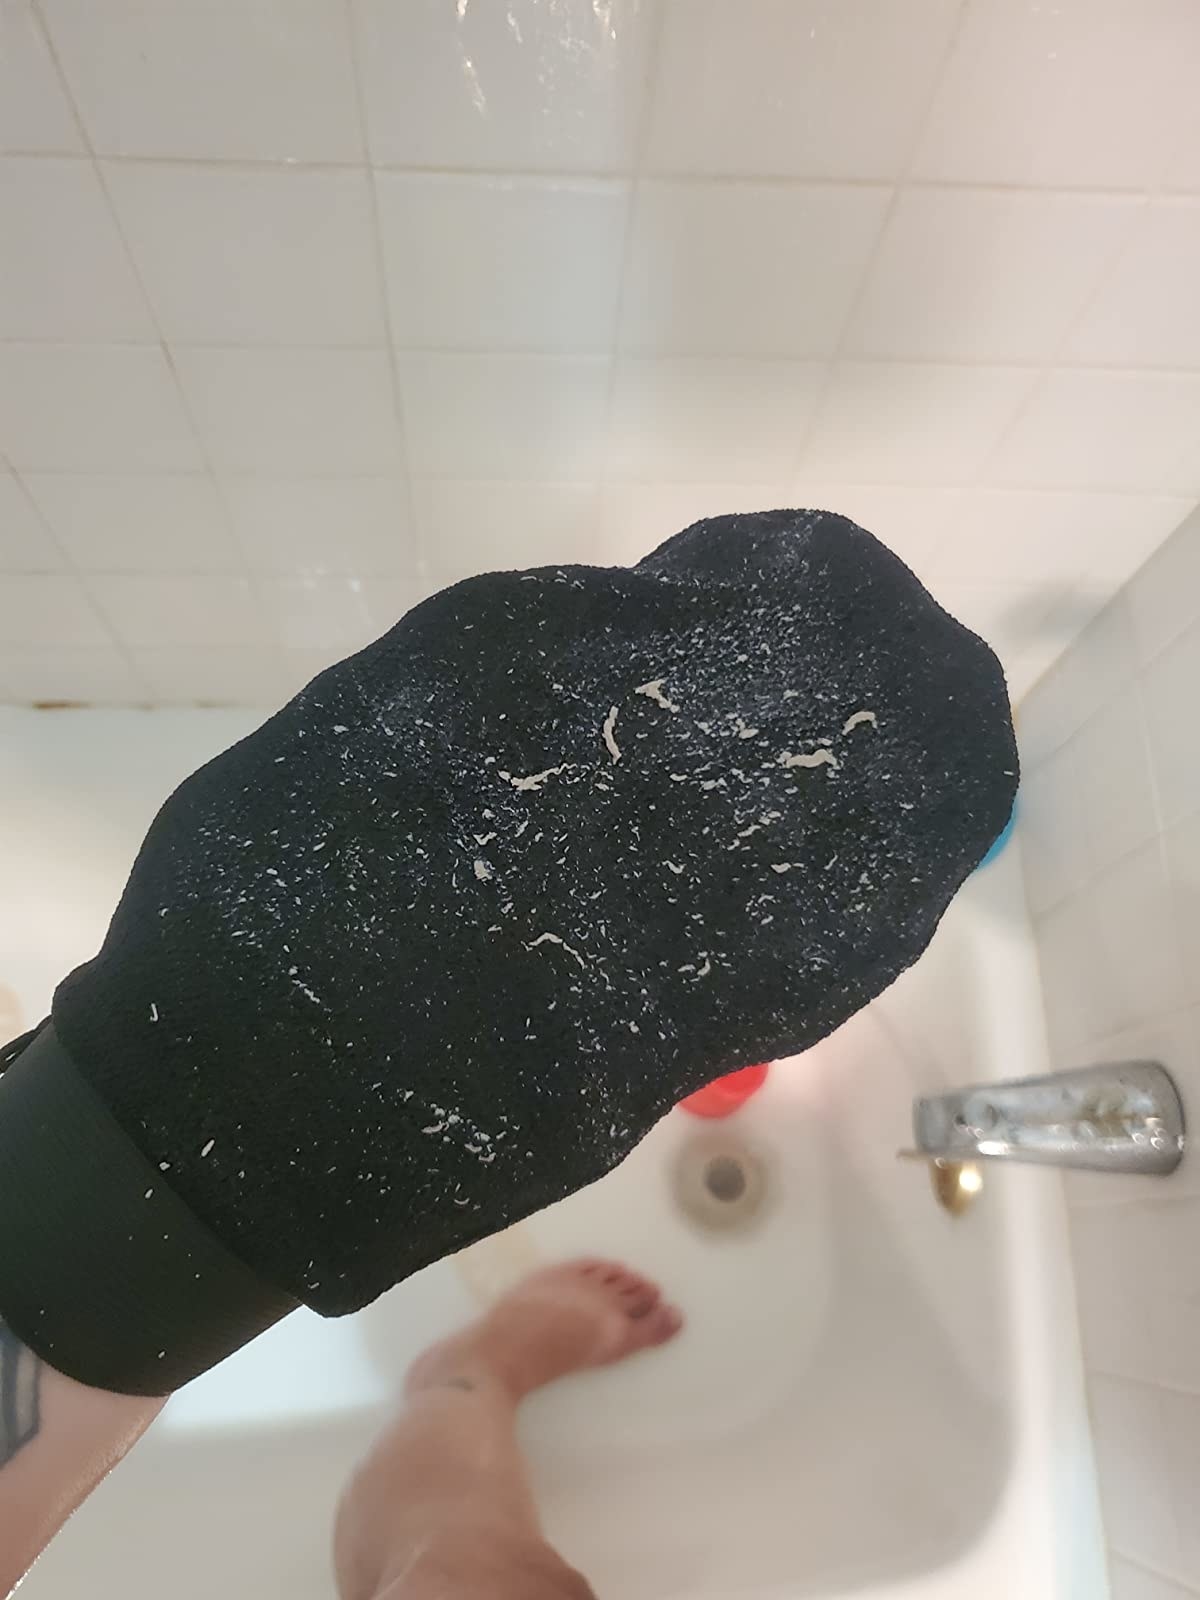 reviewer holds black exfoliating mitt covered in dead skin while taking a shower